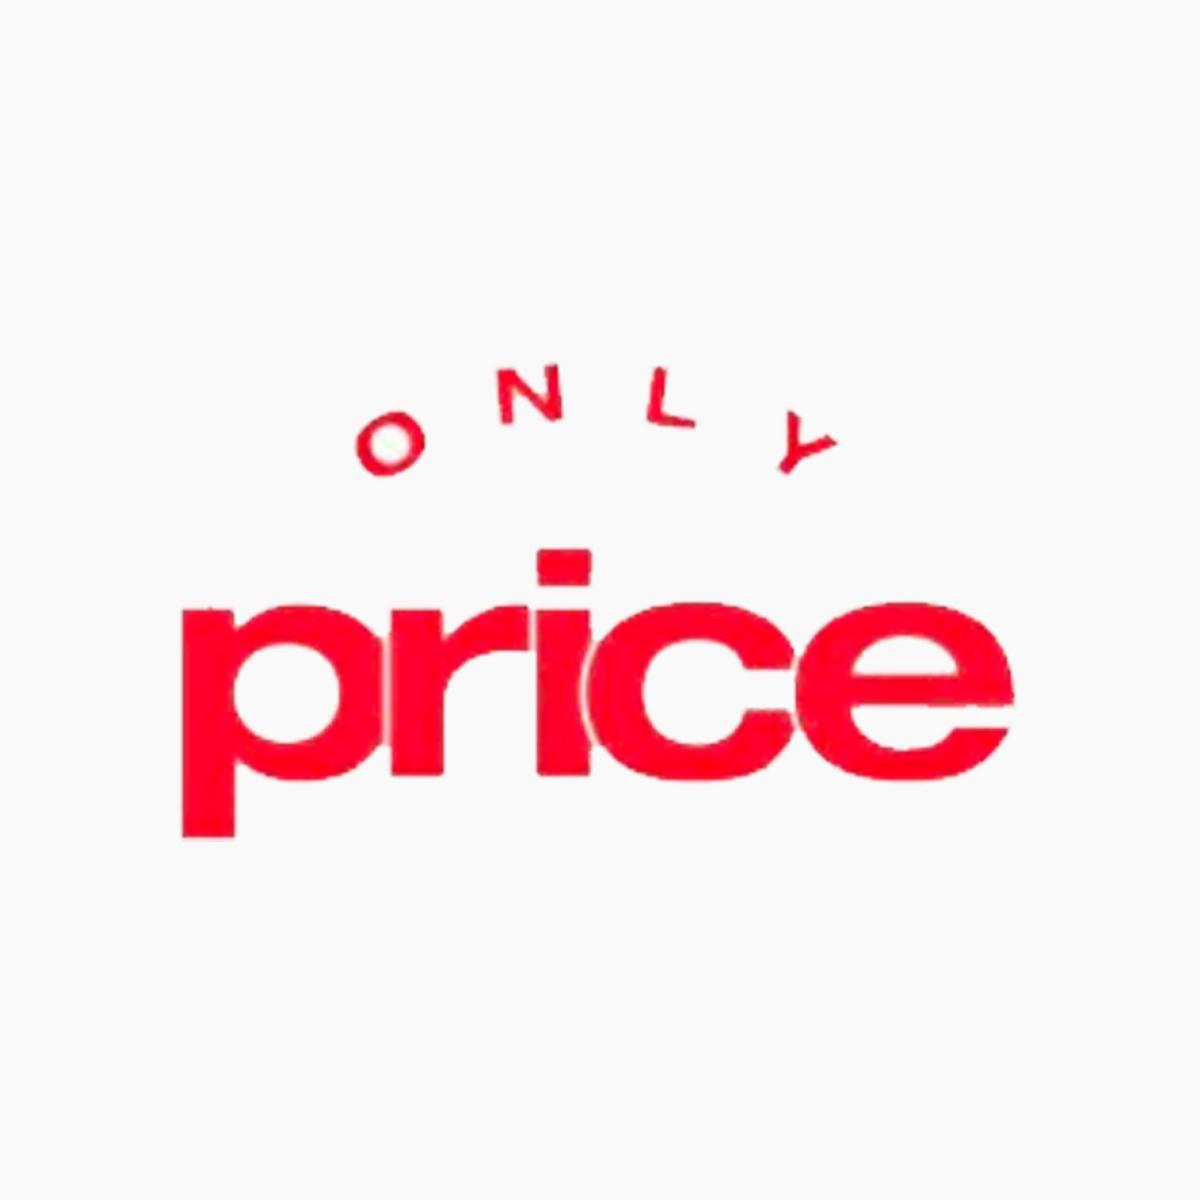 Only Price